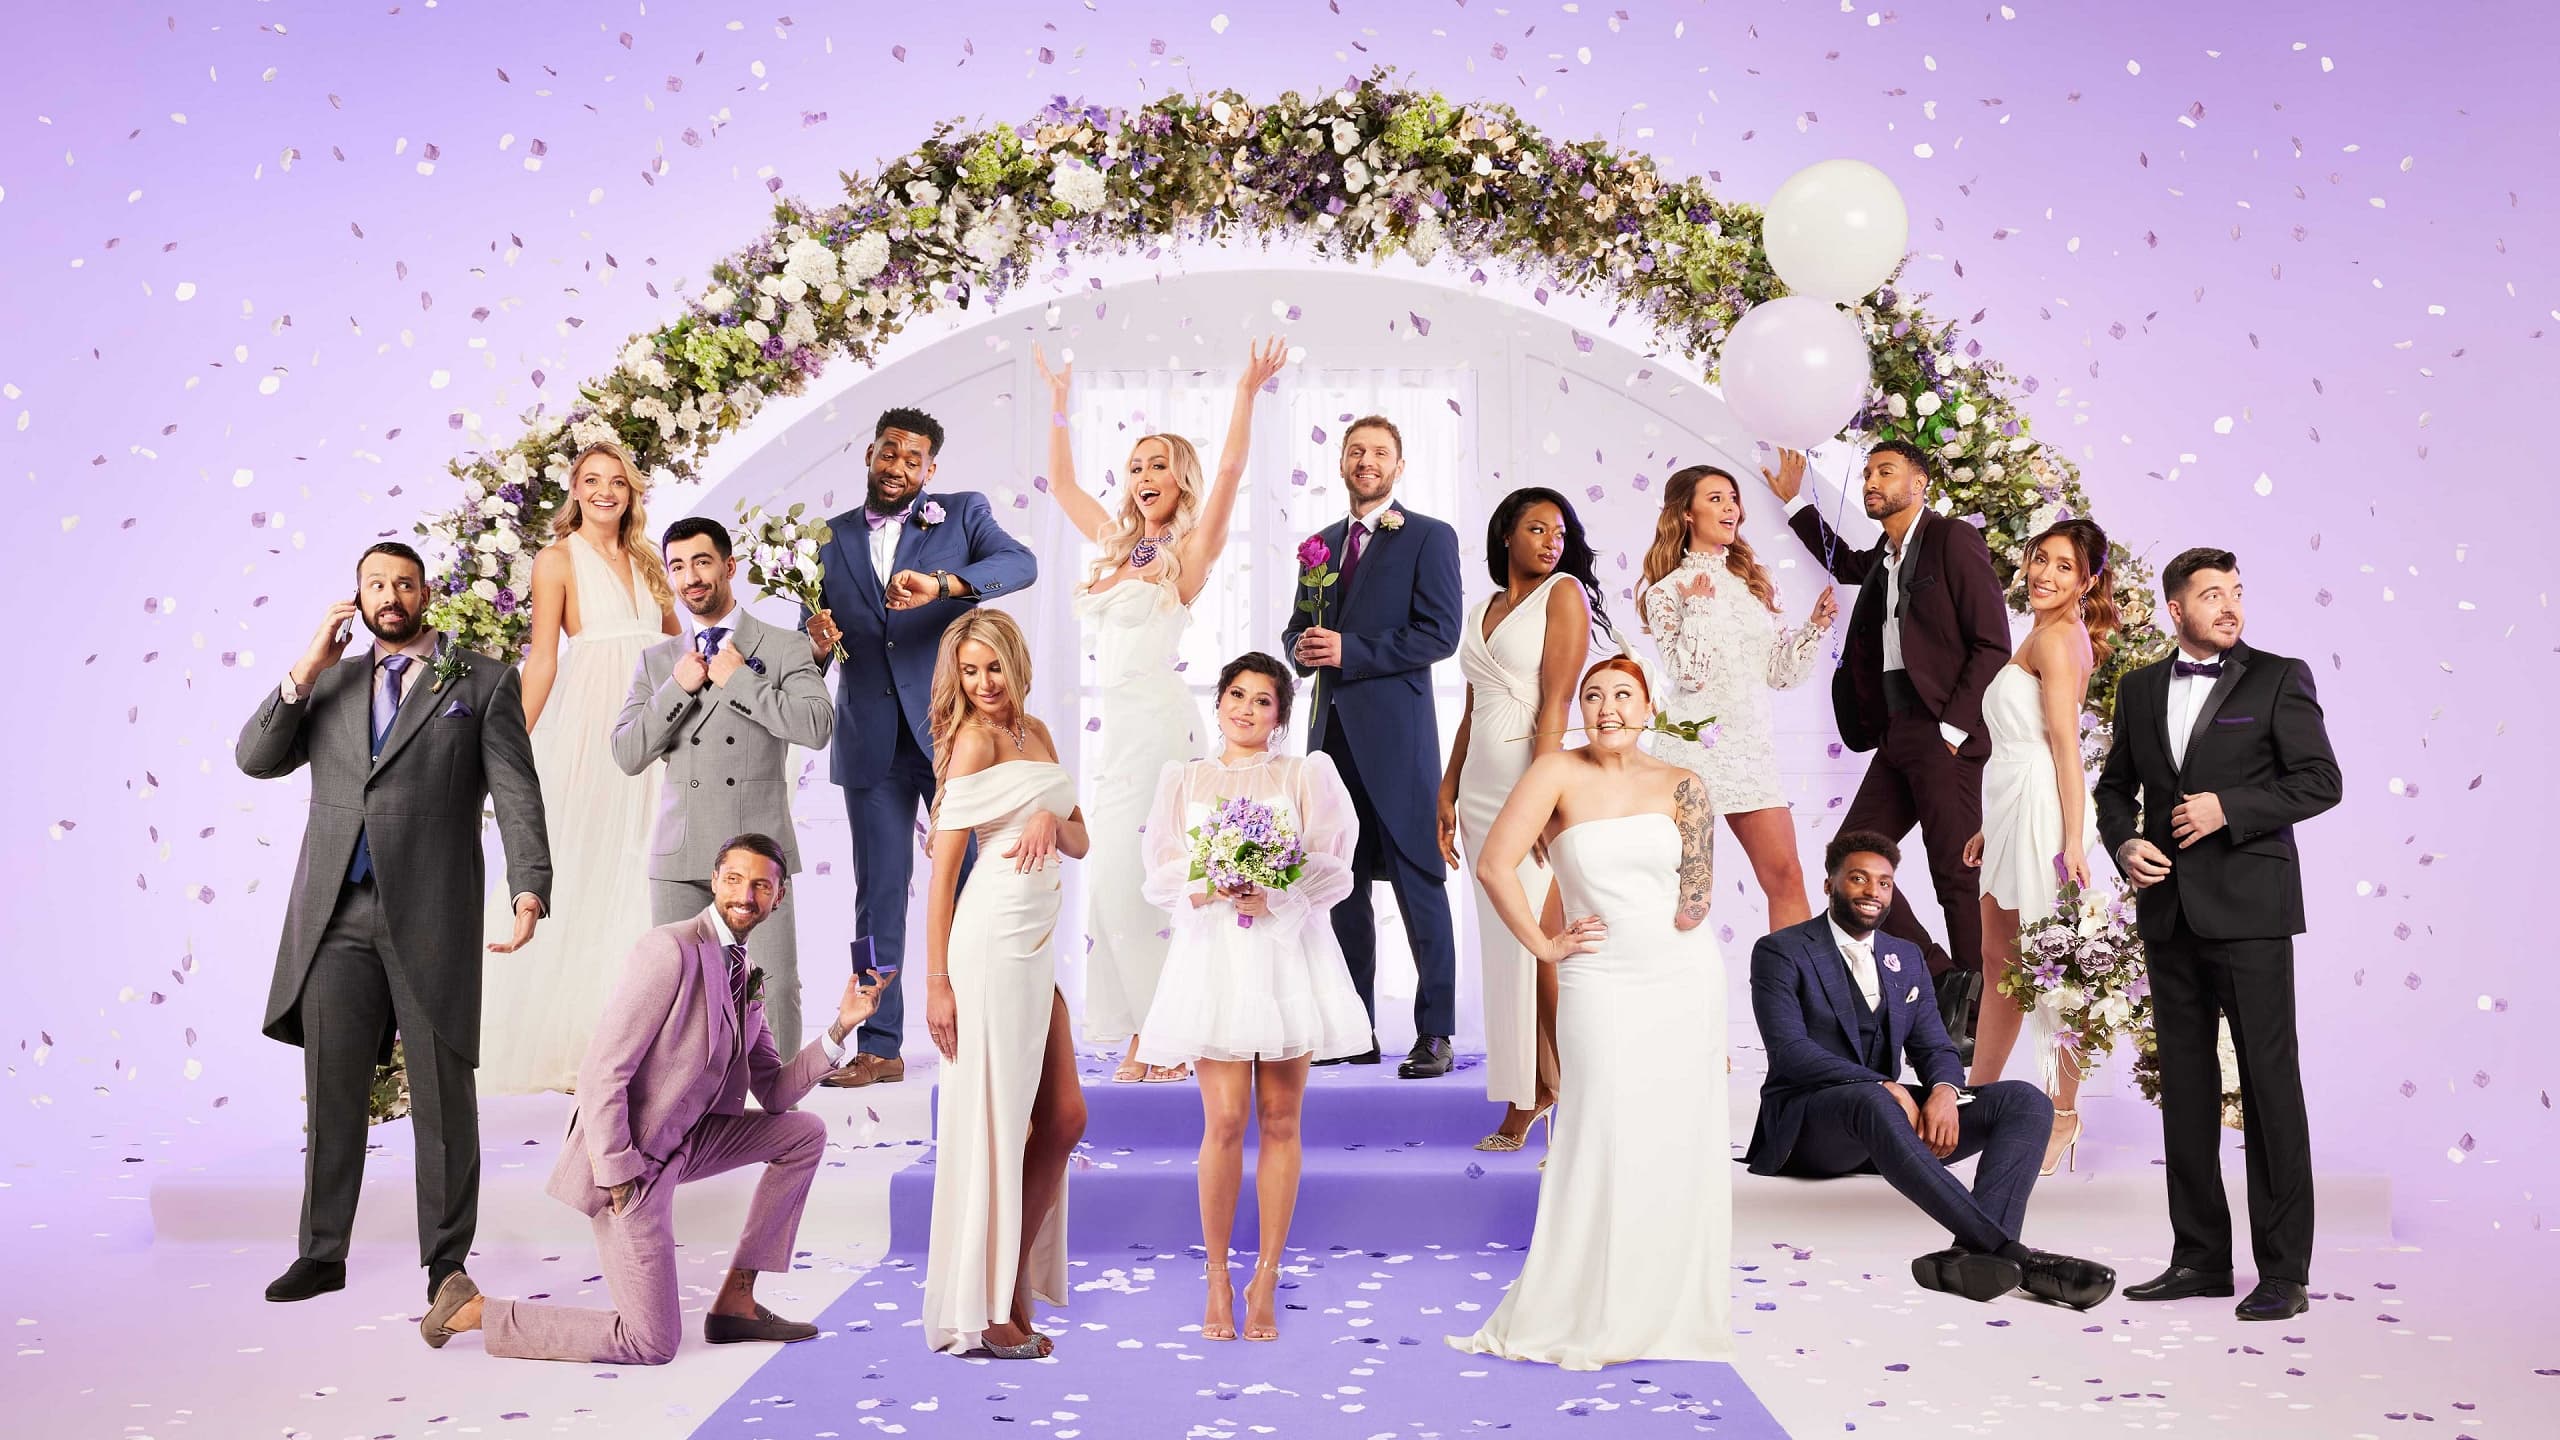 Married at First Sight UK - Season 7 Episode 1